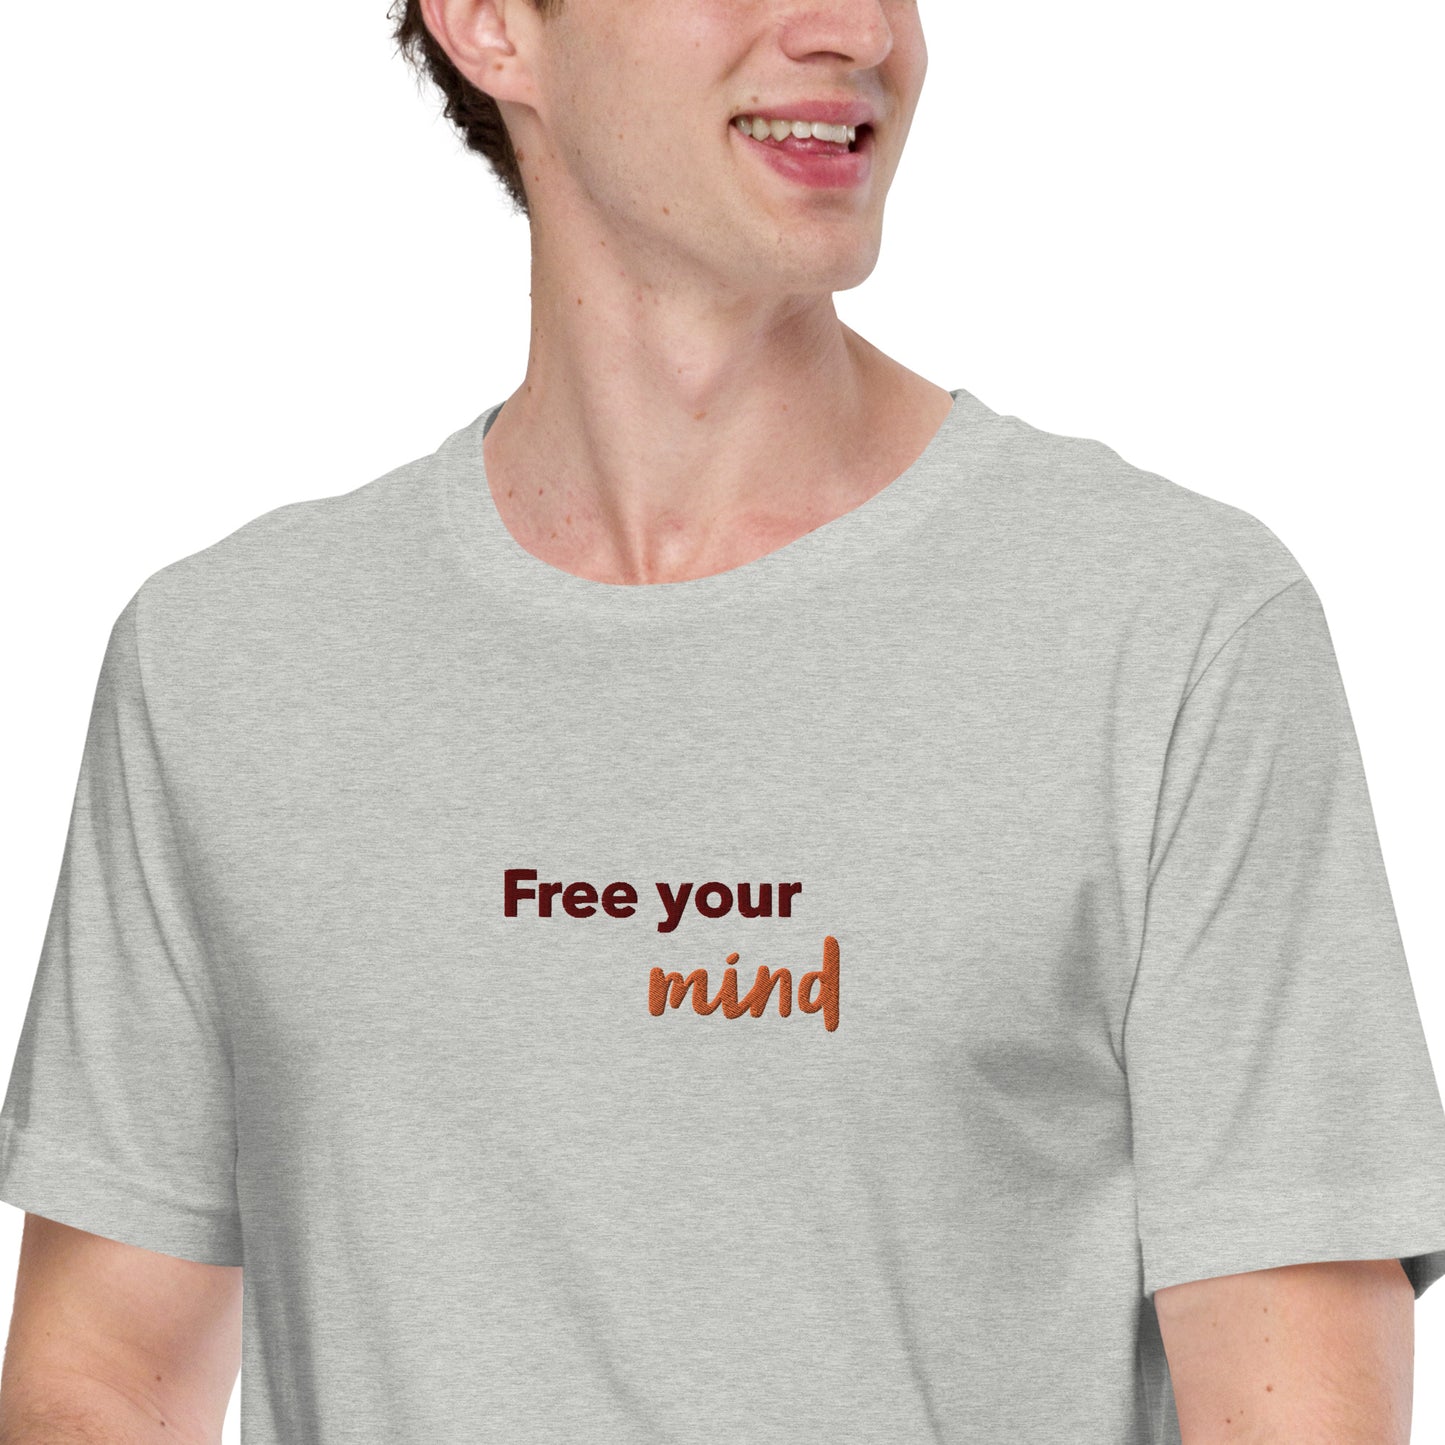 Free Your Mind Embroidered Unisex T-Shirt